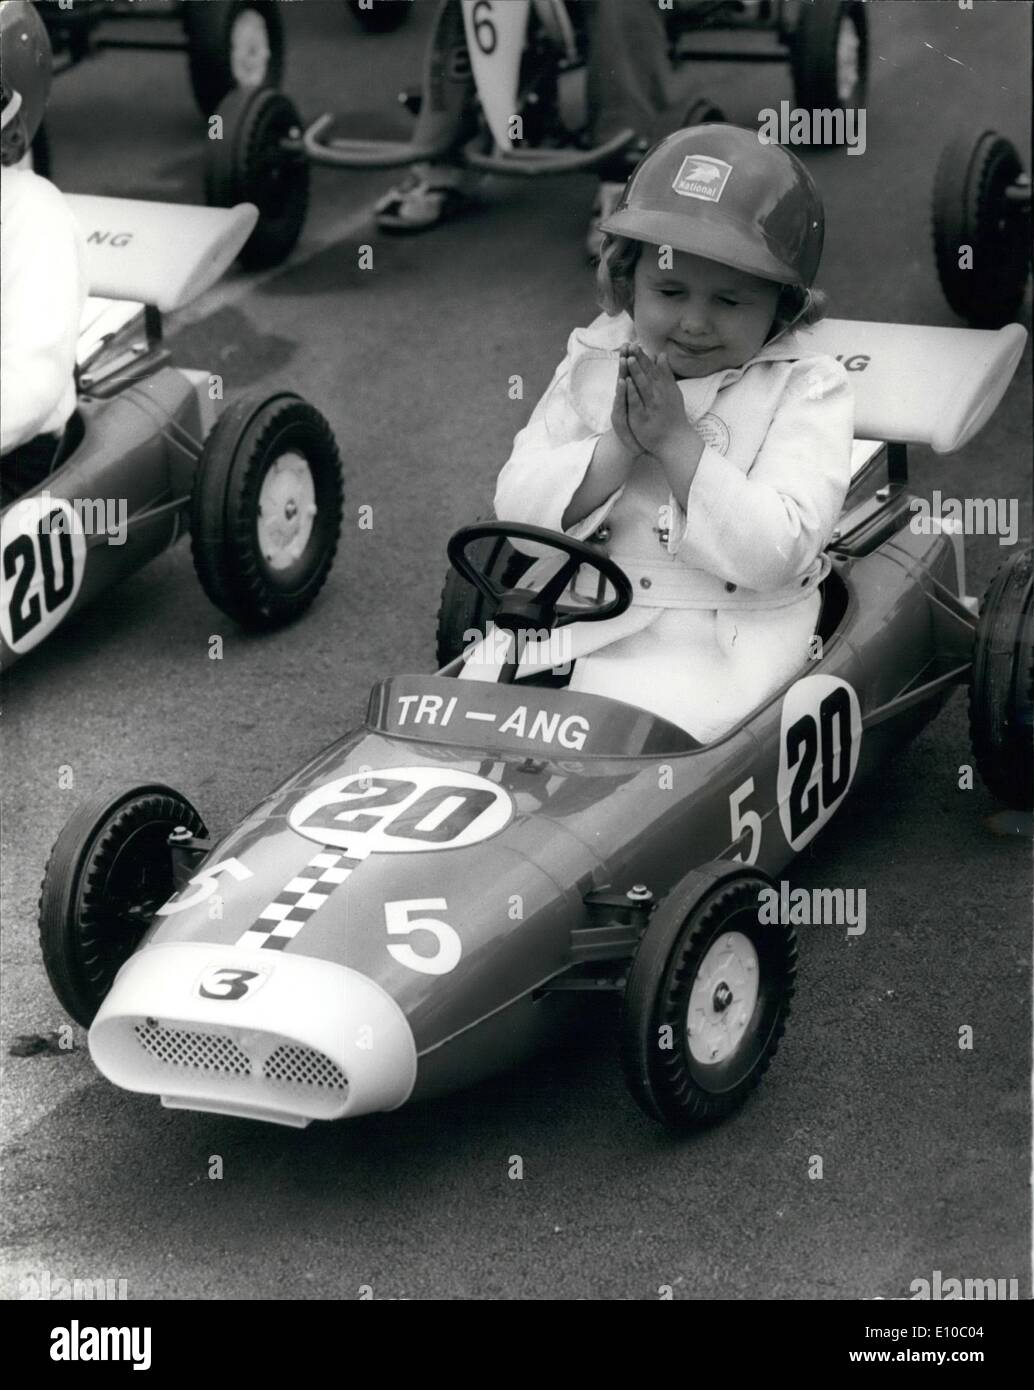 Jun. 06, 1972 - Budding Young Racing Drivers Compete In The ''Junior Grand Prix'' Championship At Crystal Palace The RAC's ''Junior Grand Prix'' finals took place when budding young racing drivers made their debut on the Crystal Palace's famous racing circuit. The Junior GP is open to boys and girls under the age of six. The young competitors race along a 75-yard straight in specially prepared racing cars - pedal power of course. The winner keeps the car - and the special crash helmet Stock Photo